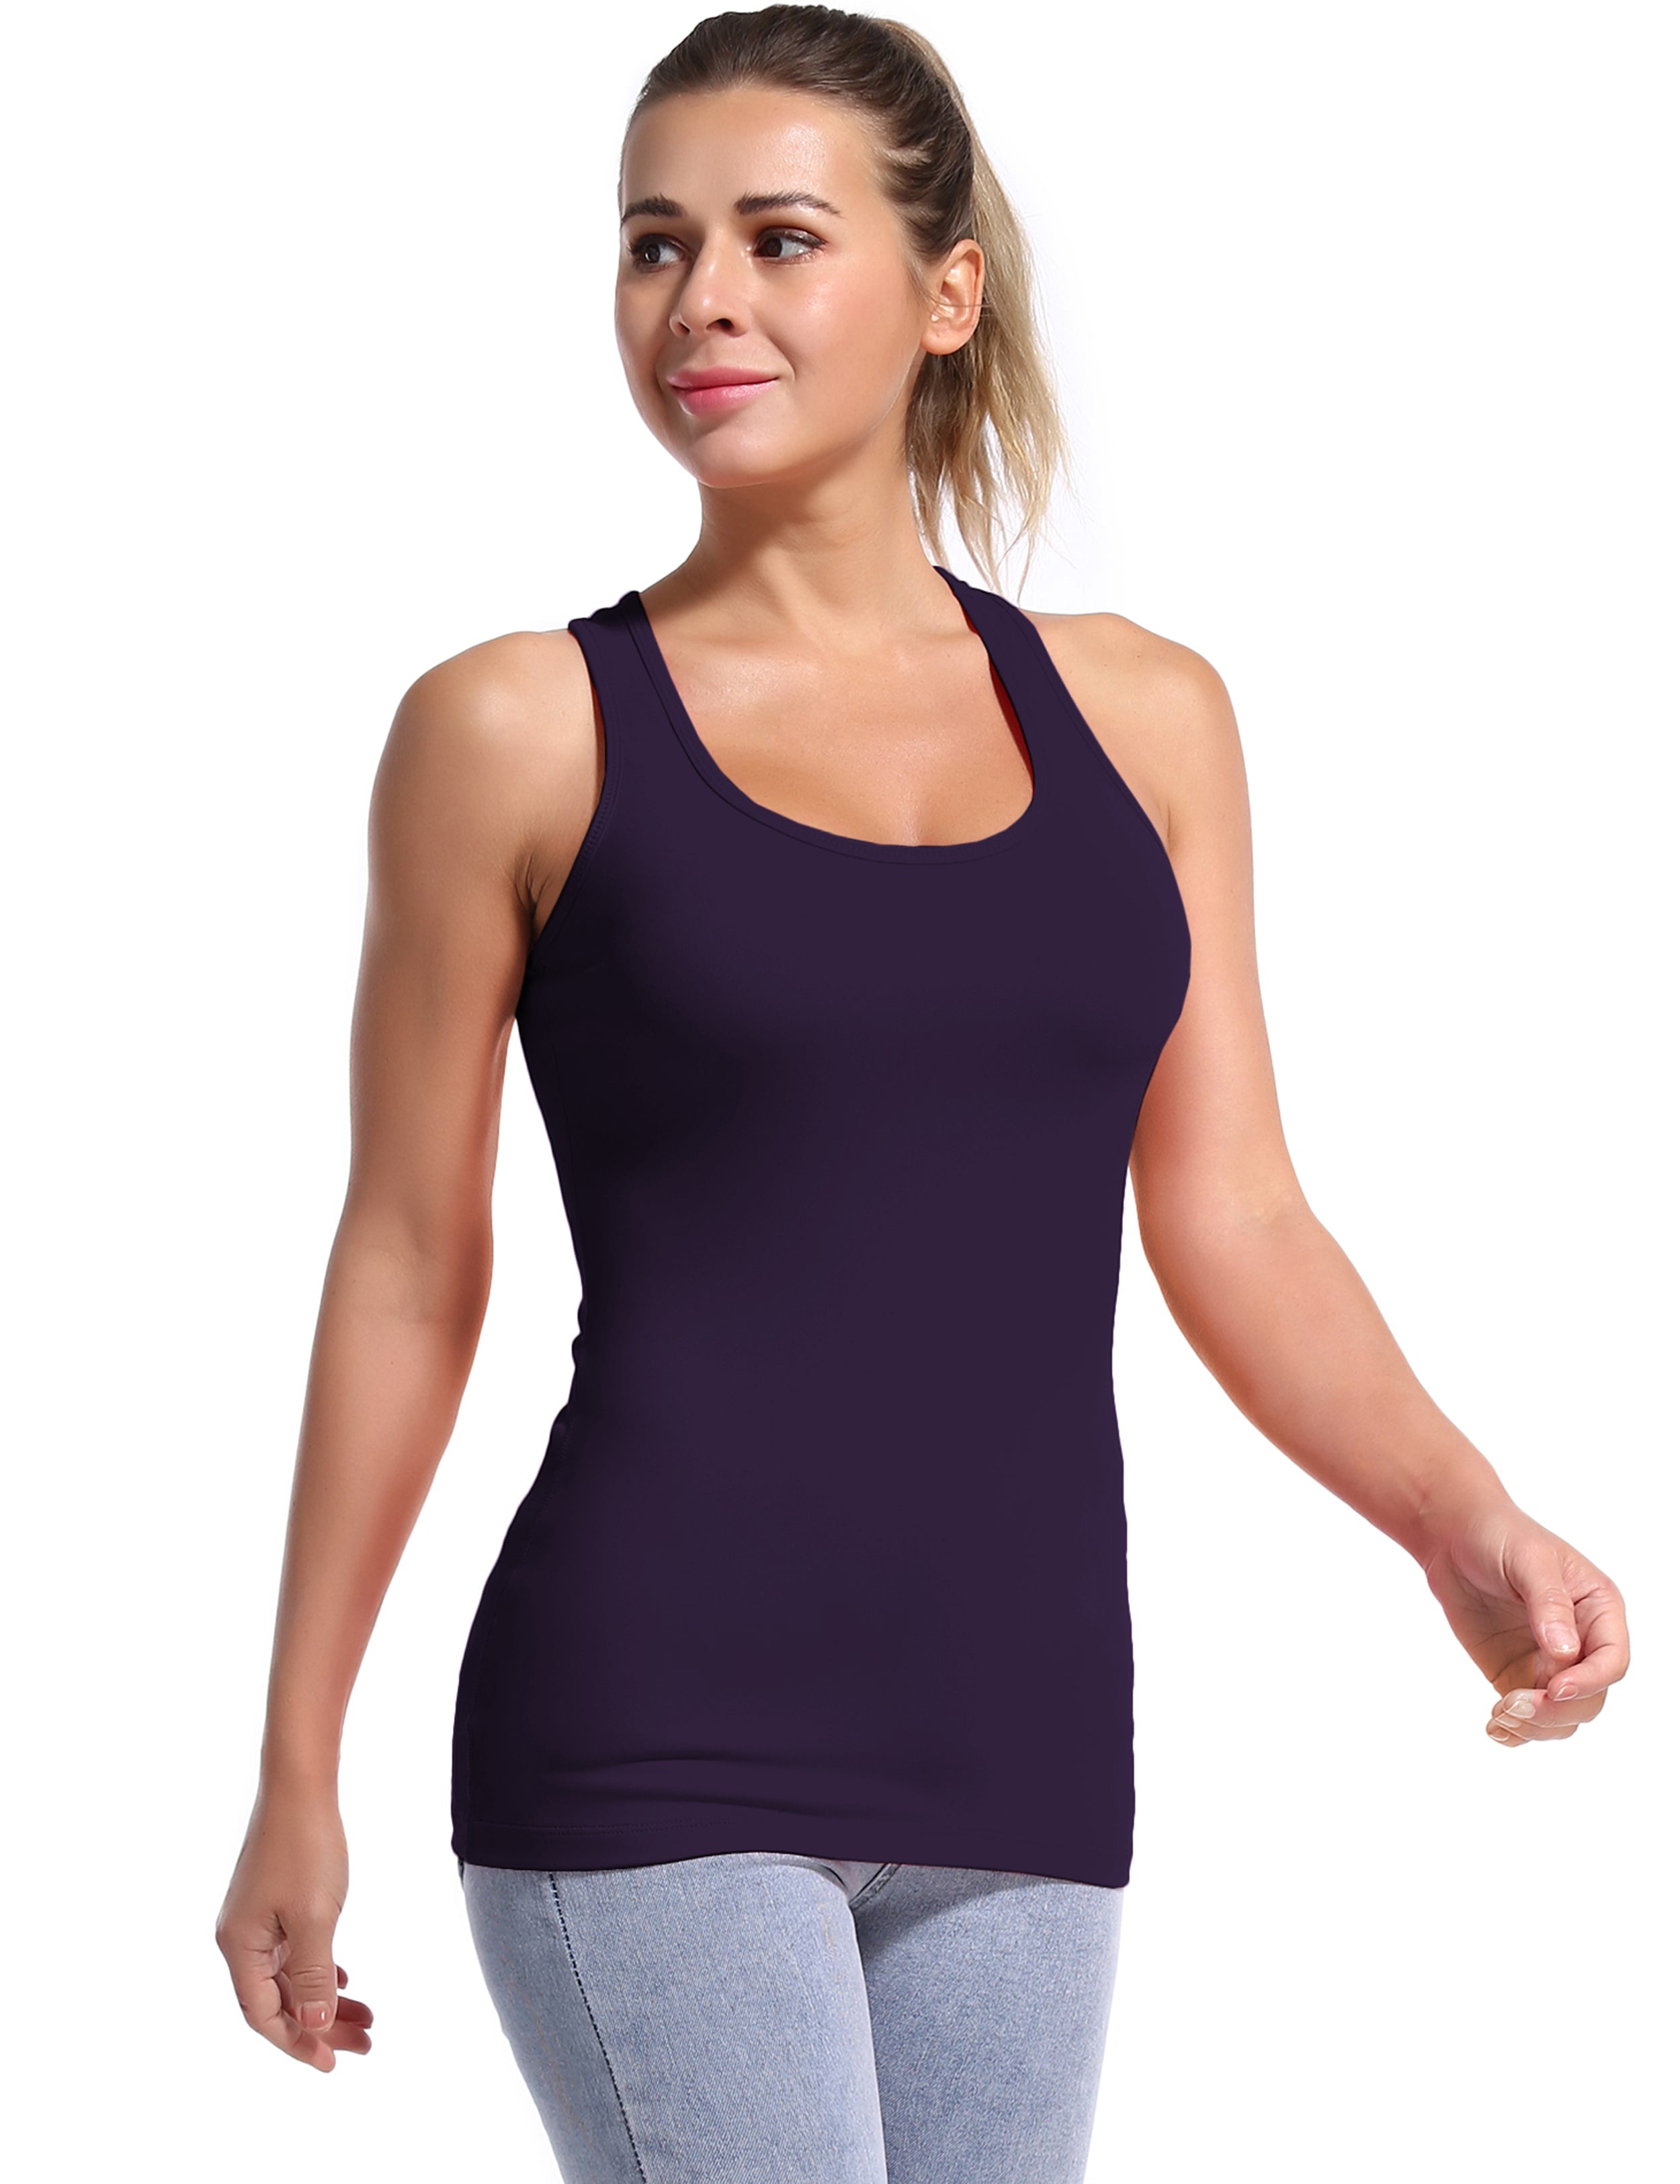 Racerback Athletic Tank Tops midnightblue 92%Nylon/8%Spandex(Cotton Soft) Designed for Tall Size Tight Fit So buttery soft, it feels weightless Sweat-wicking Four-way stretch Breathable Contours your body Sits below the waistband for moderate, everyday coverage